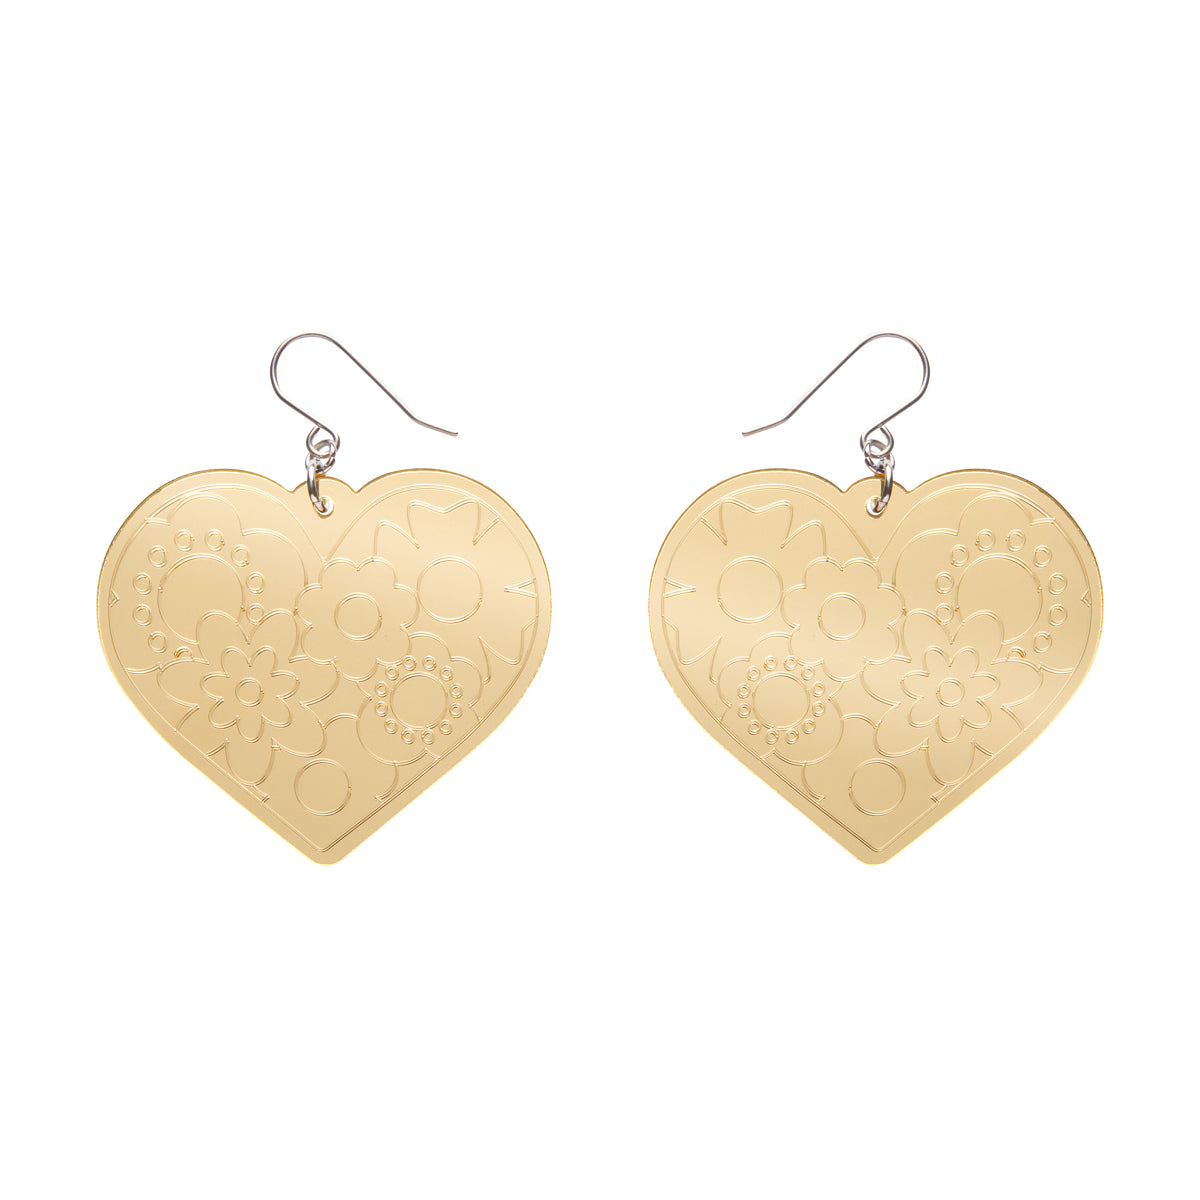 pair Spellbound Essentials Collection "Love Heart" dangle earrings in shiny etched mirror finish gold 100% Acrylic resin